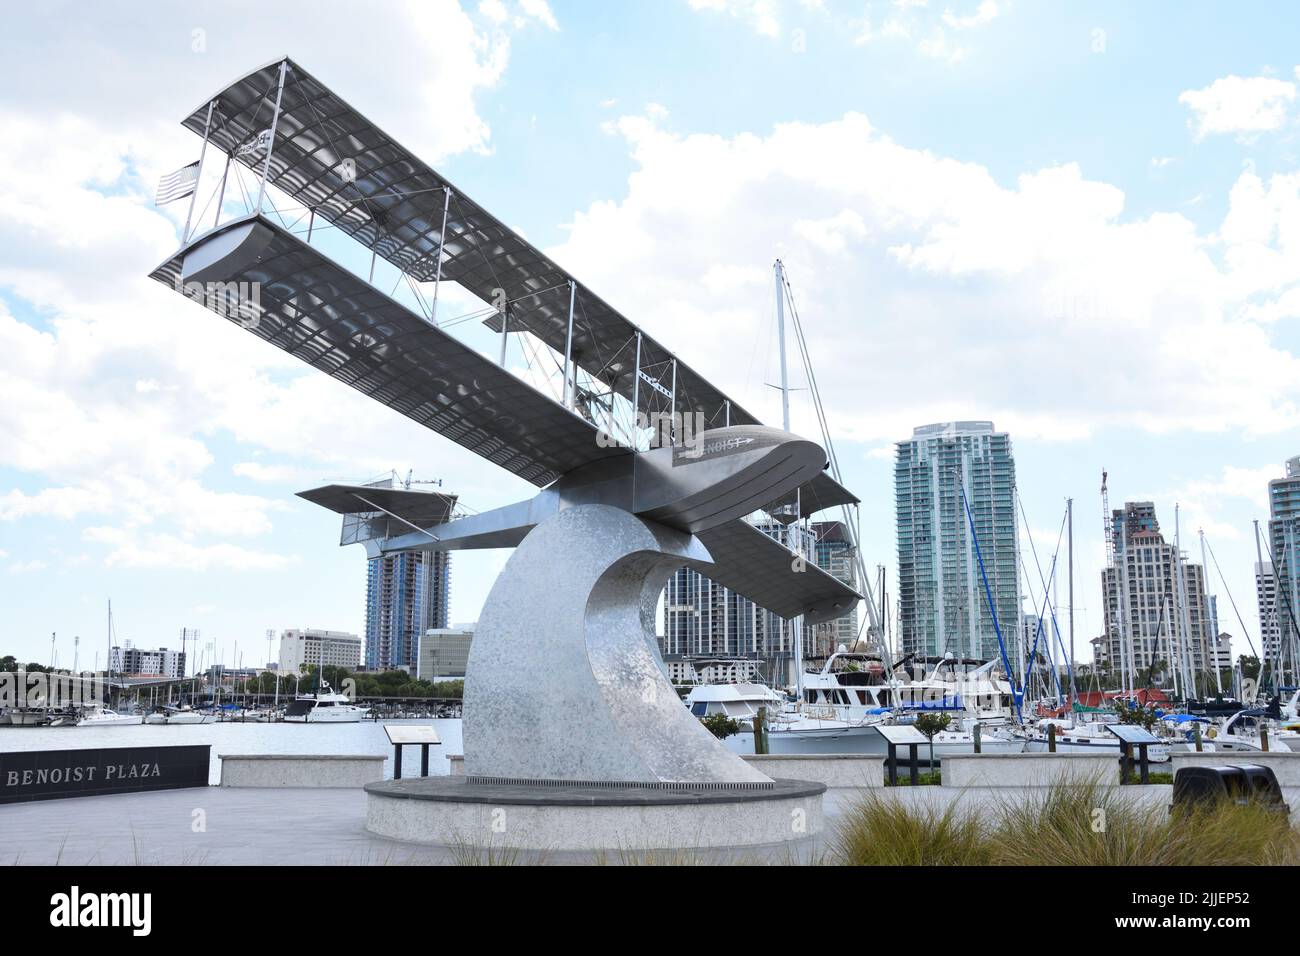 A sculpture monument of the Benoist Airboat at the Benoist Centennial Plaza, St. Pete Pier, Florida, USA. City high rise buildings in the background. Stock Photo